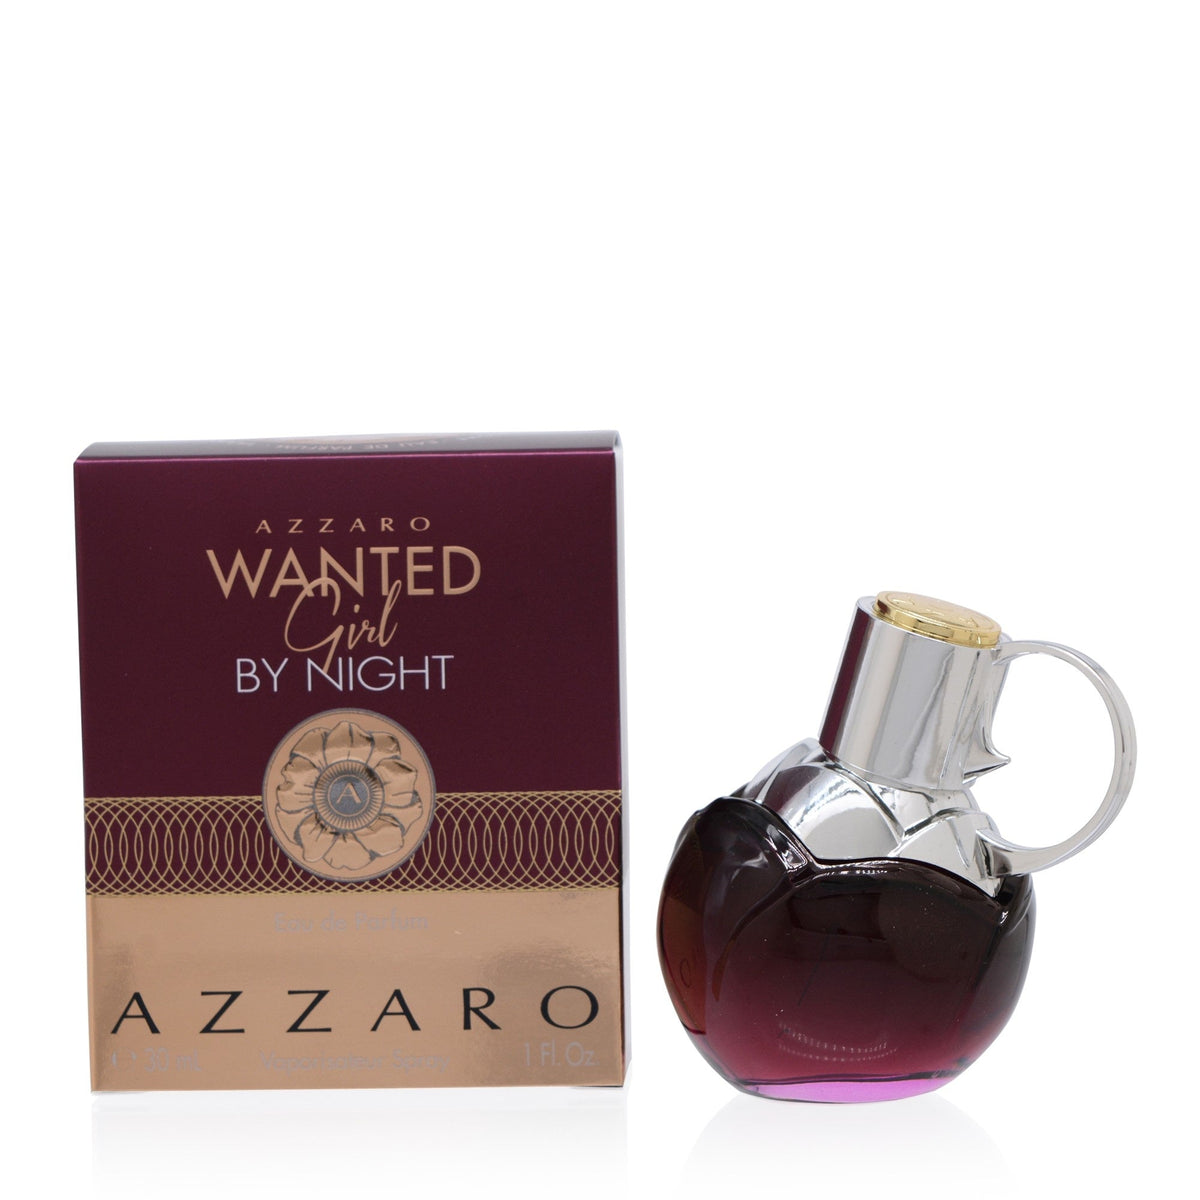 Wanted Girl By Night Azzaro Edp Spray 1.0 Oz (30 Ml) For Women  LC845100